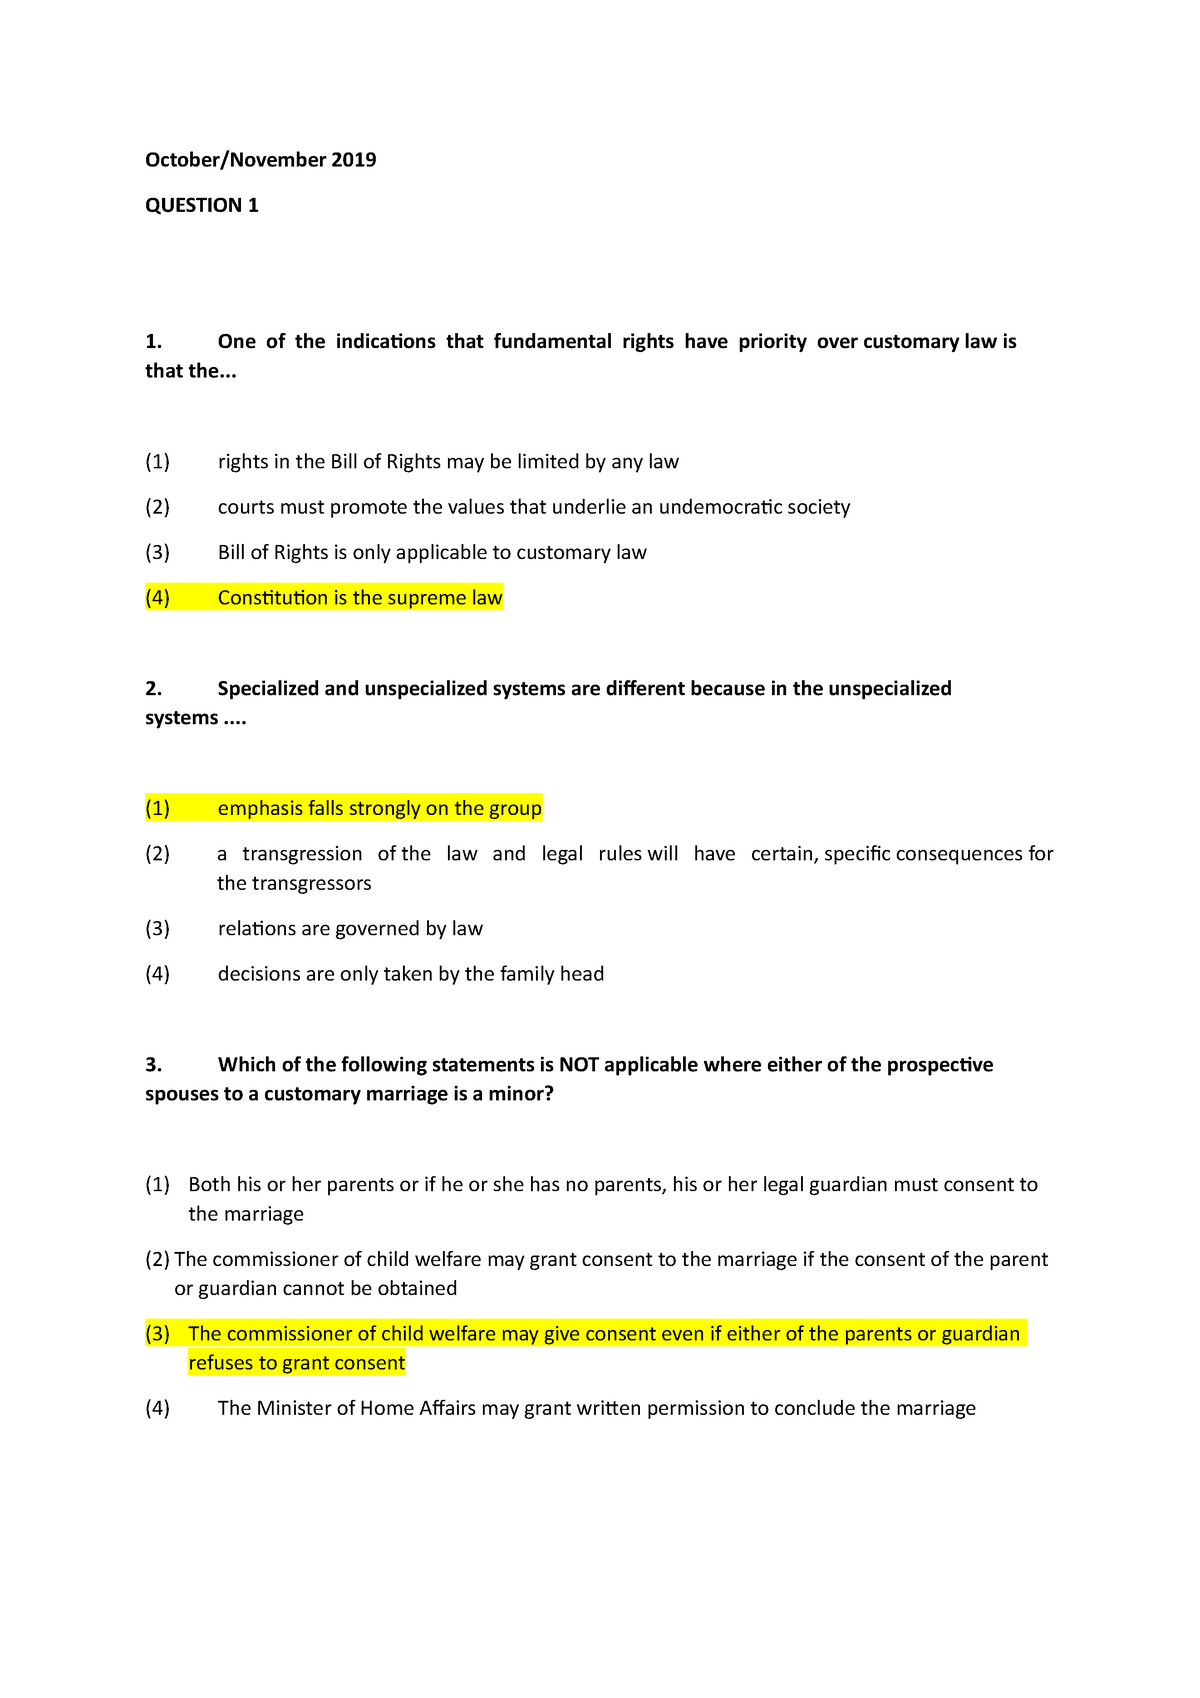 exam-mcq-questions-2014-2019-october-november-2019-question-1-one-of-the-indications-that